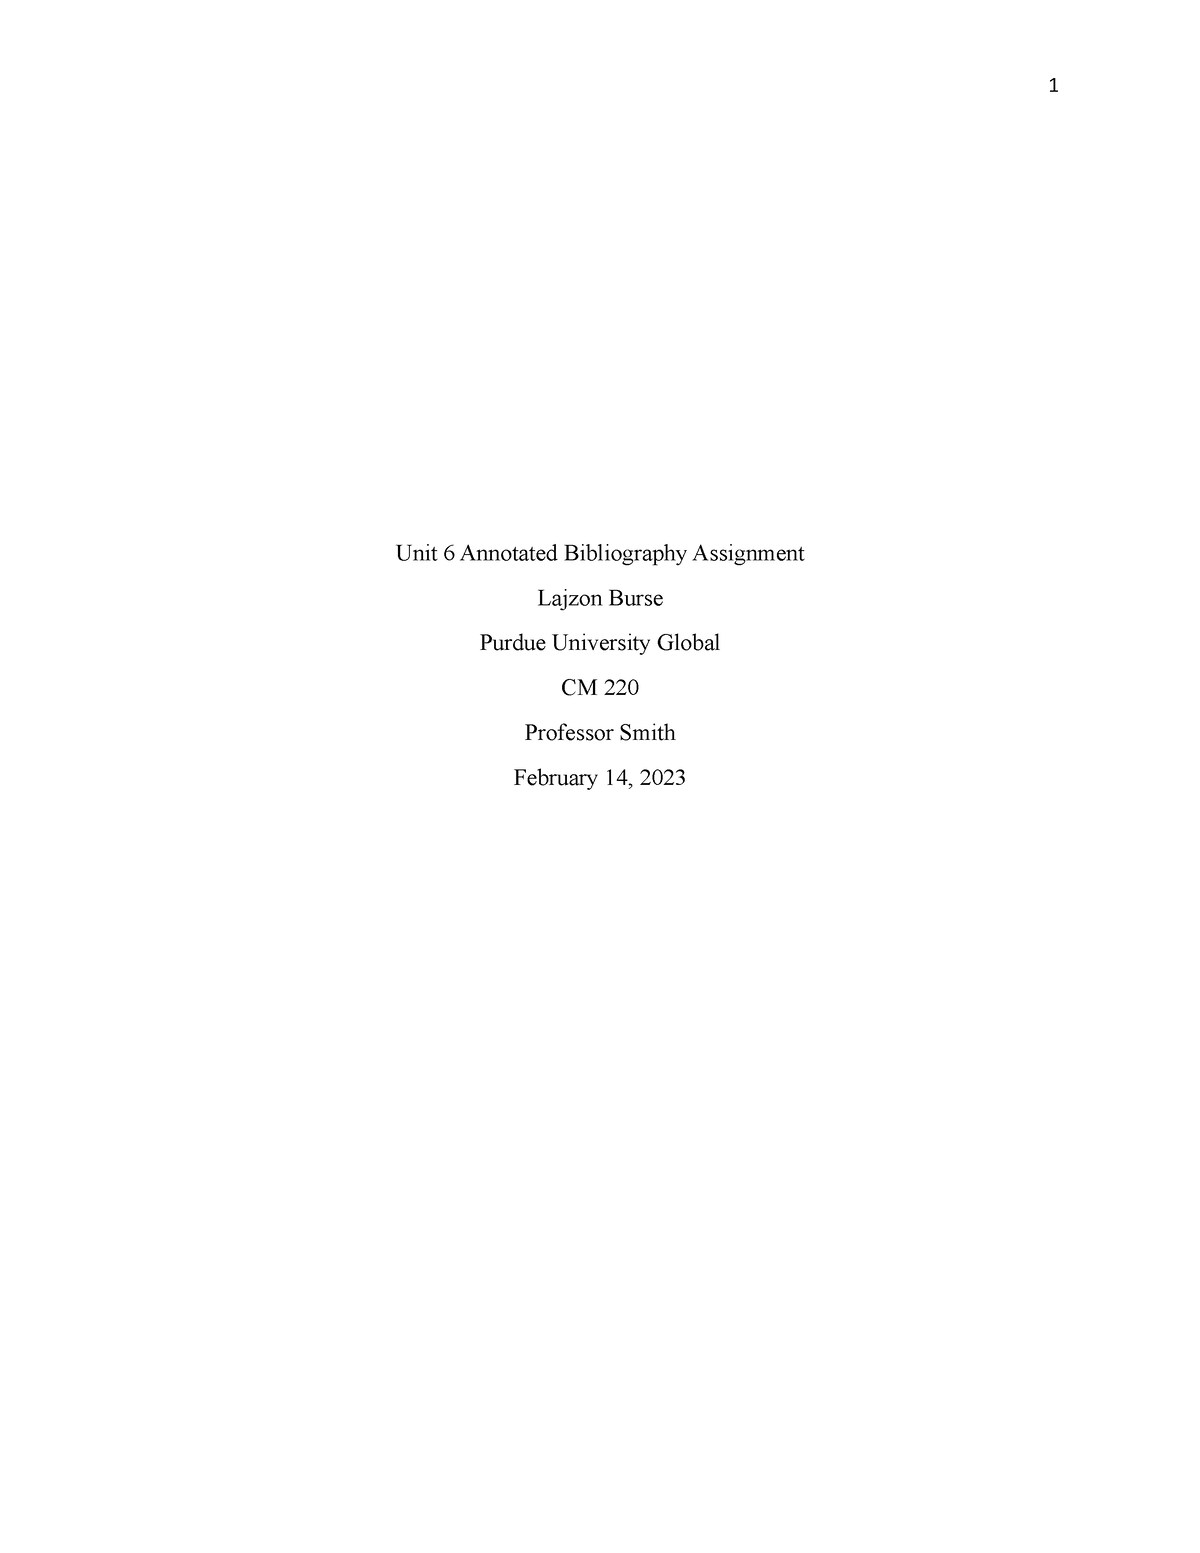 Cm220 unit 6 assignment - 1 Unit 6 Annotated Bibliography Assignment ...